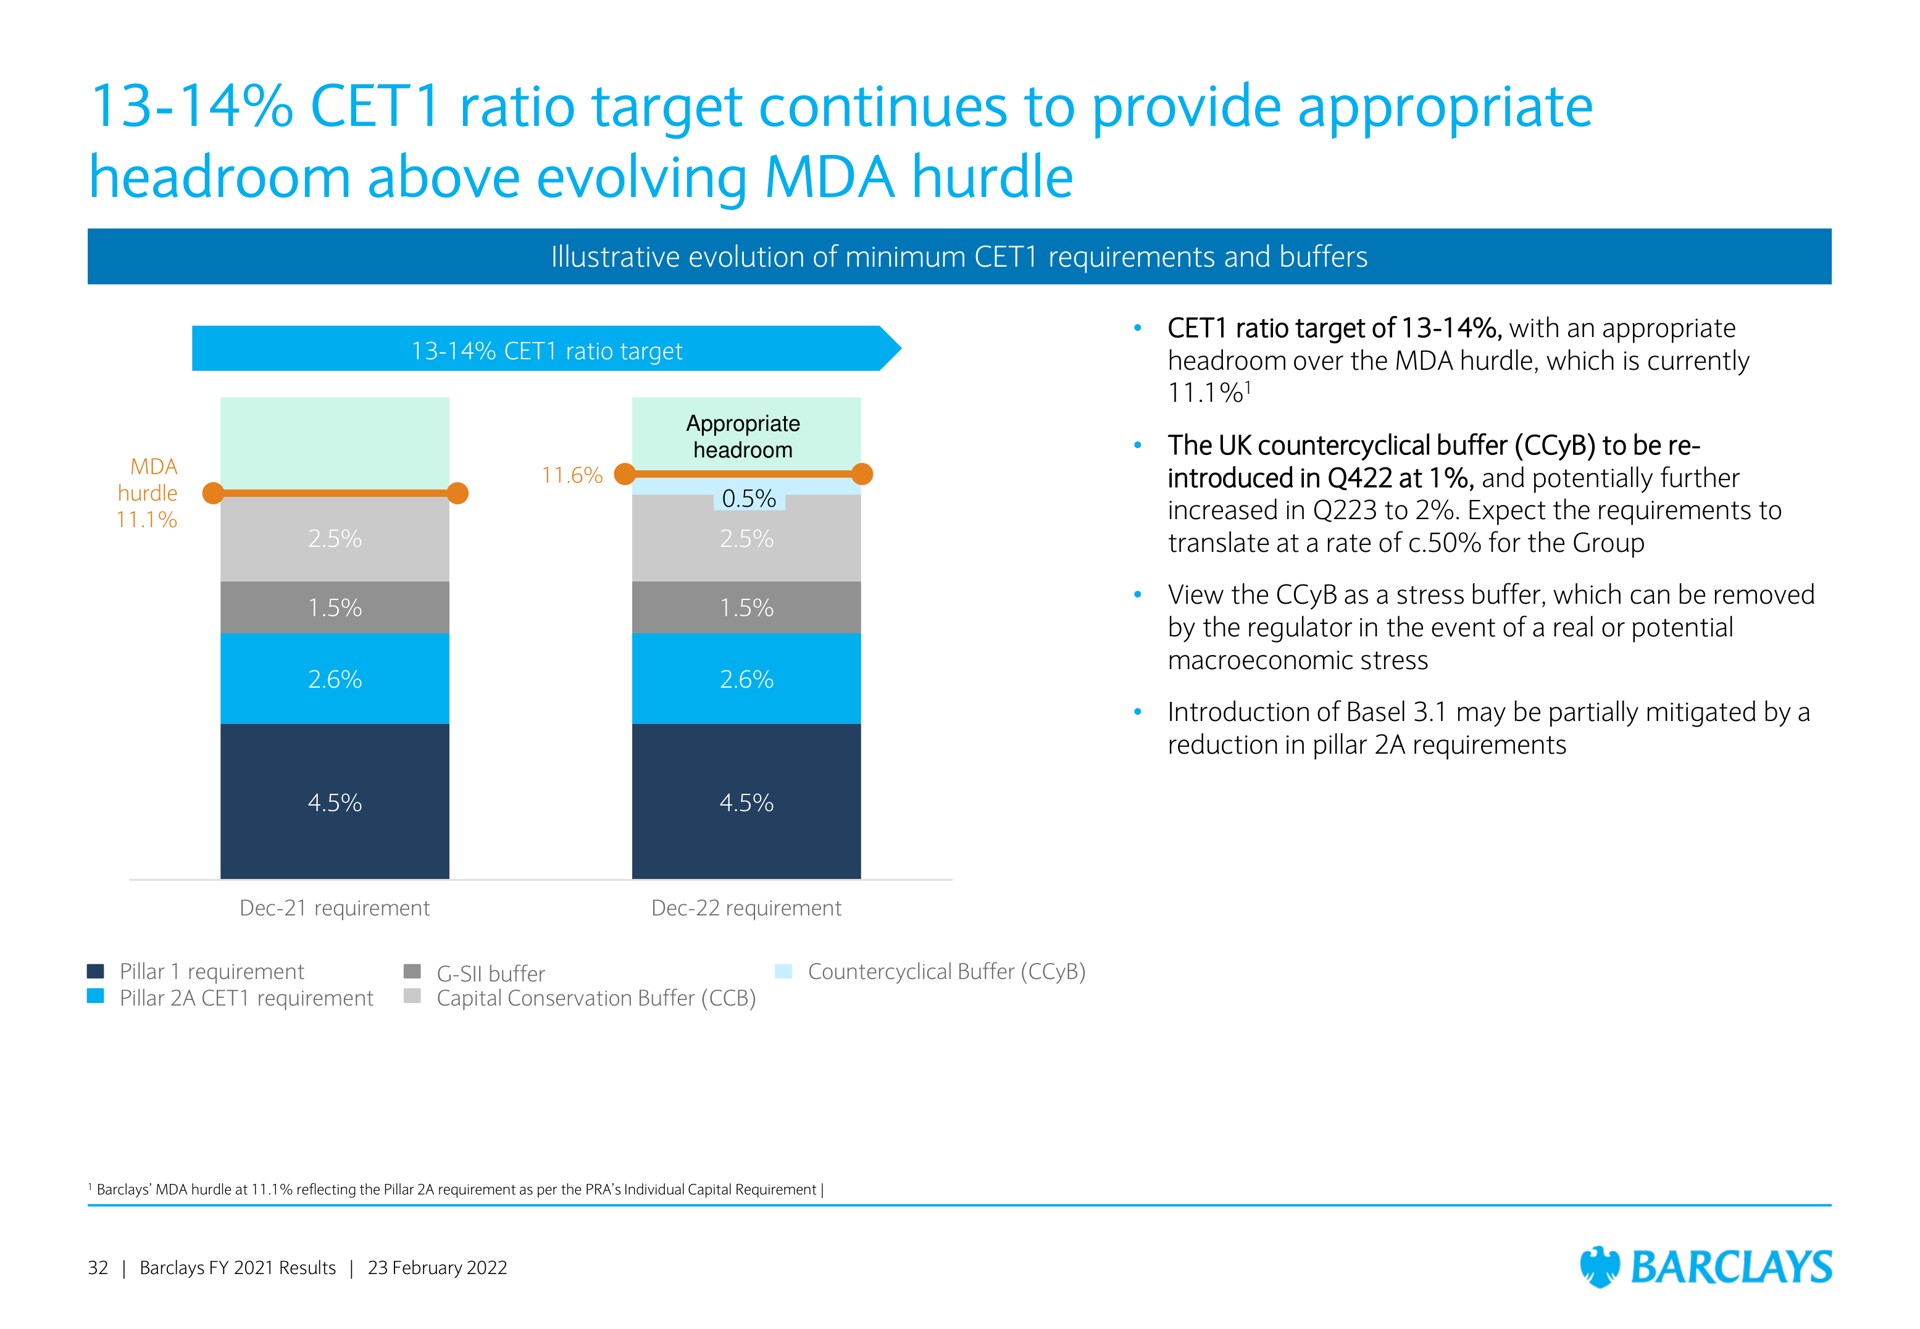 ratio target continues to provide appropriate headroom above evolving hurdle over the which is currently | Barclays